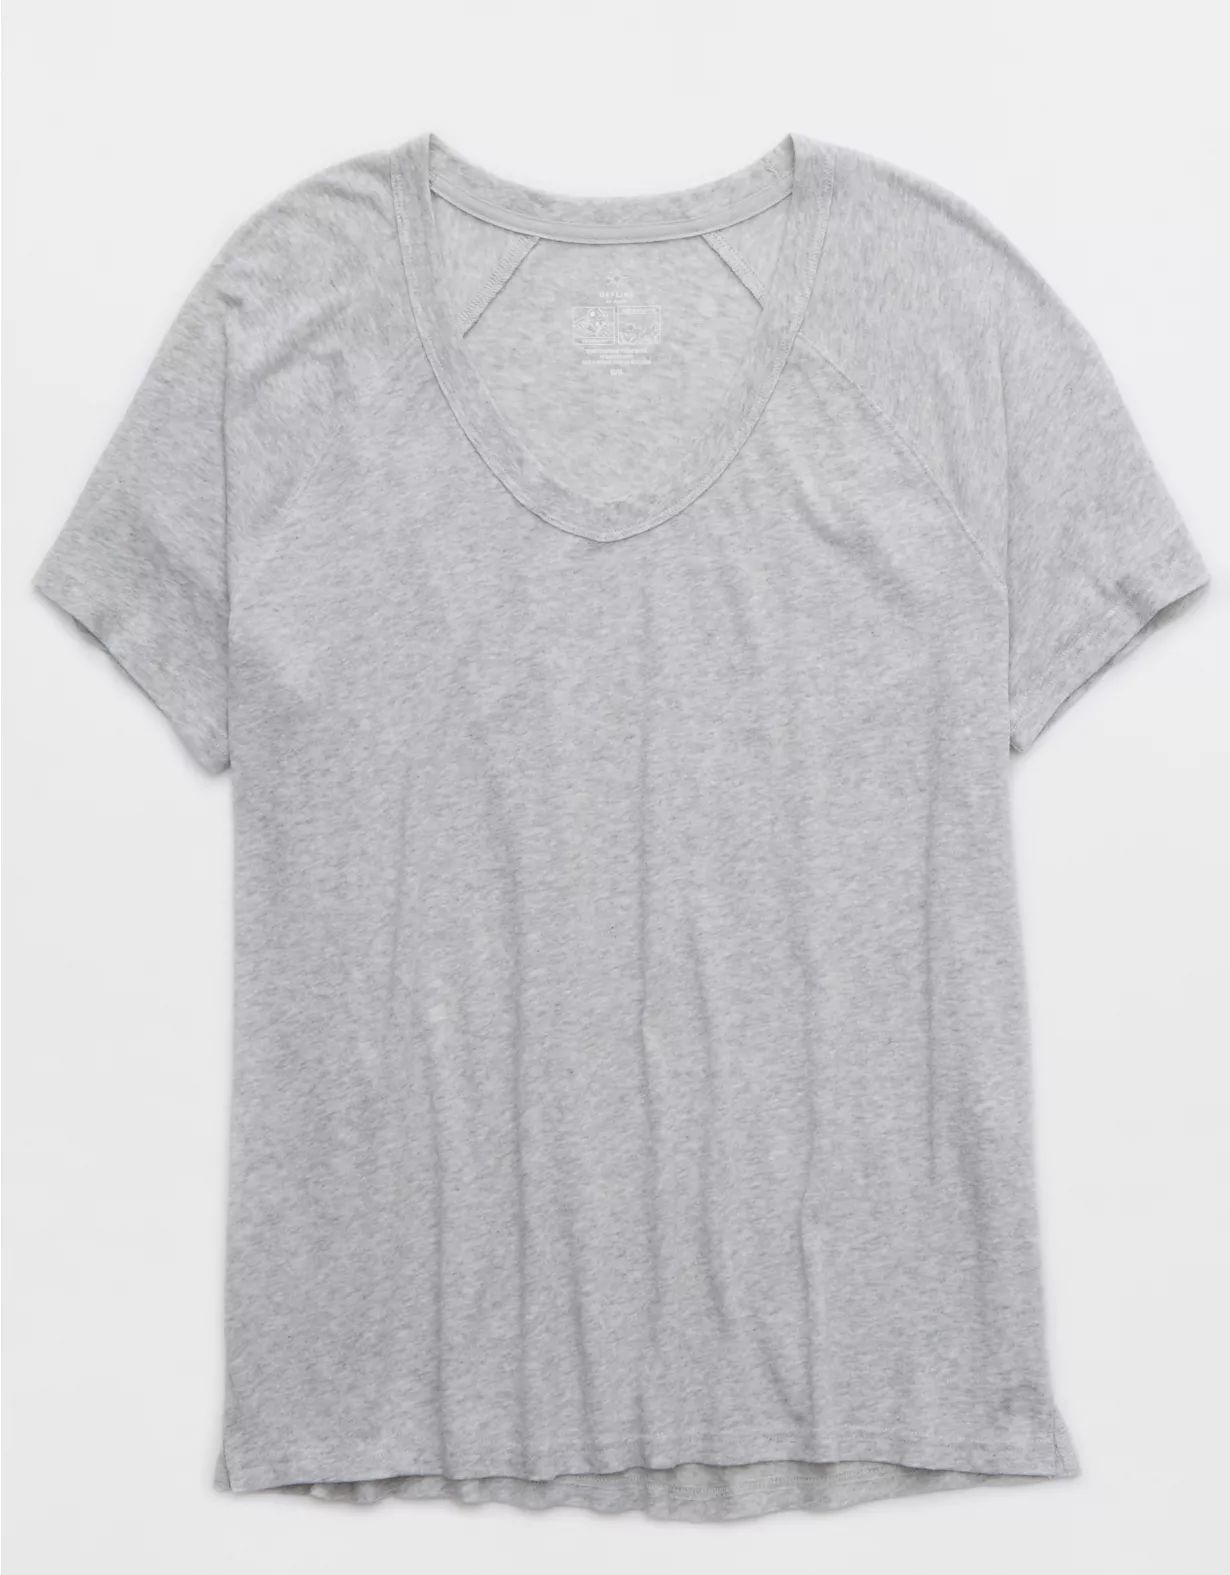 OFFLINE By Aerie Bouncy Cotton Scoop Neck T-Shirt | Aerie